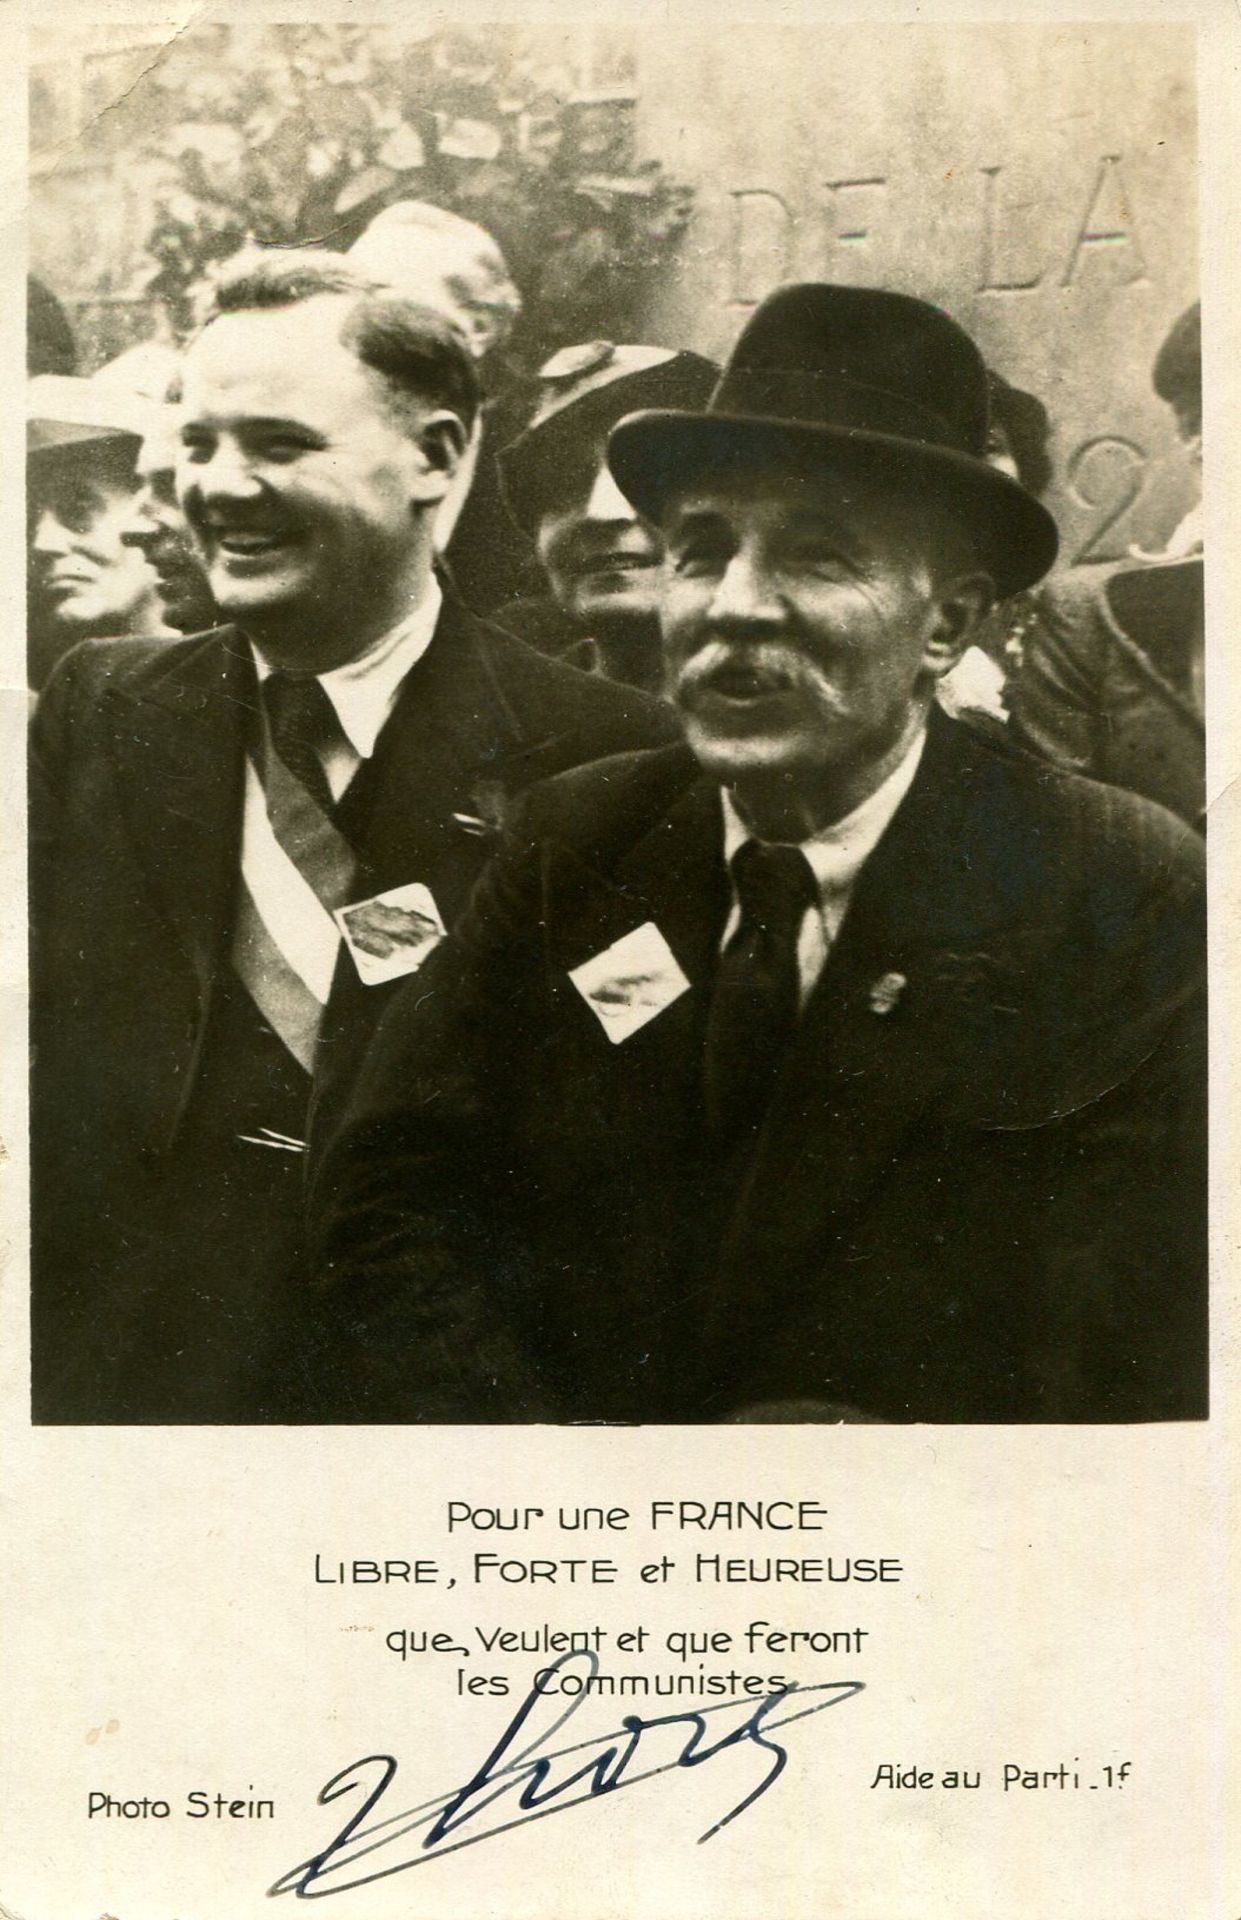 THOREZ MAURICE: (1900-1964) French politician who served as General Secretary of the French